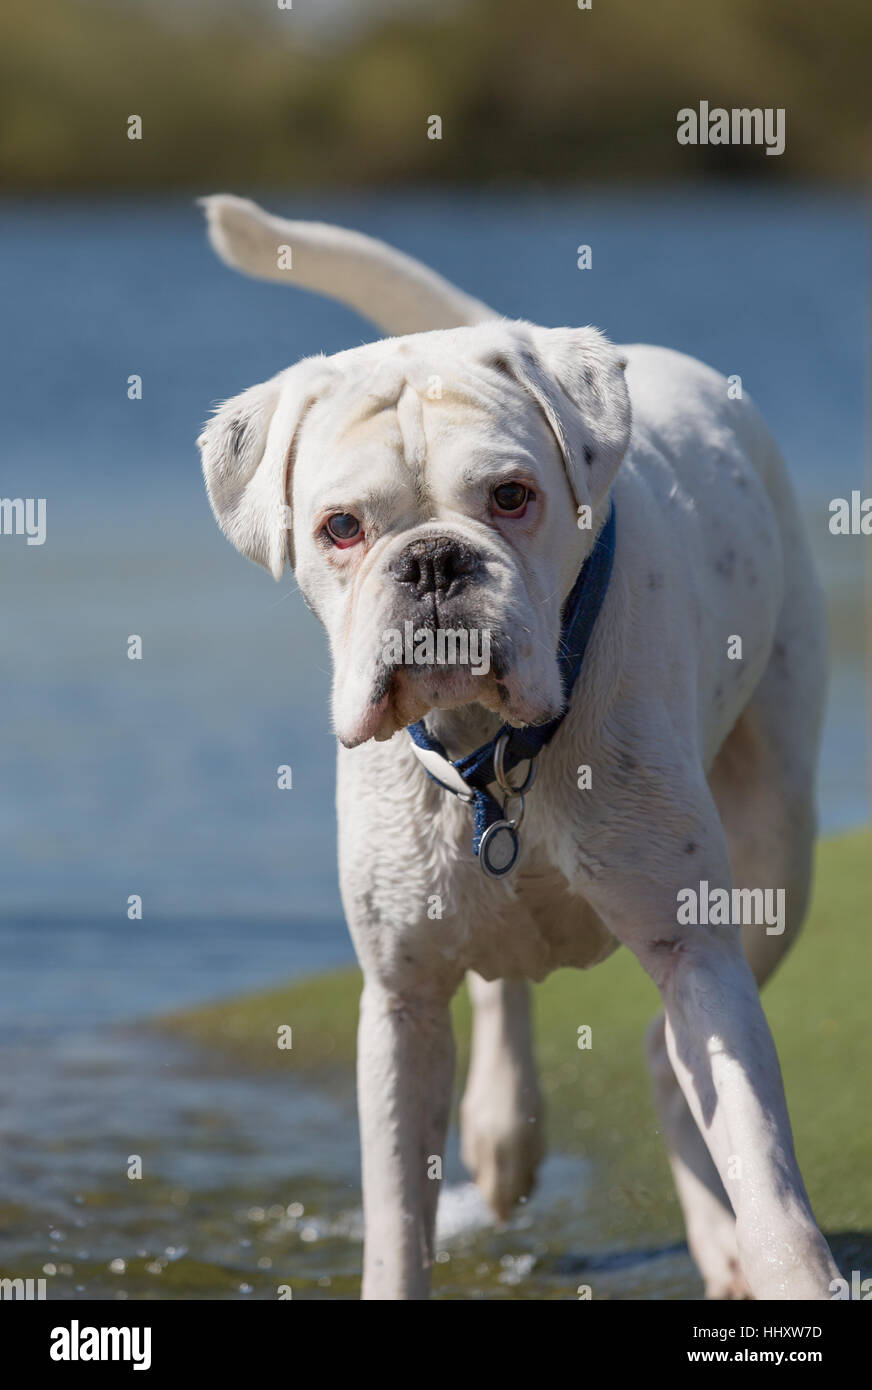 White male boxer dog standing in shallow water Stock Photo